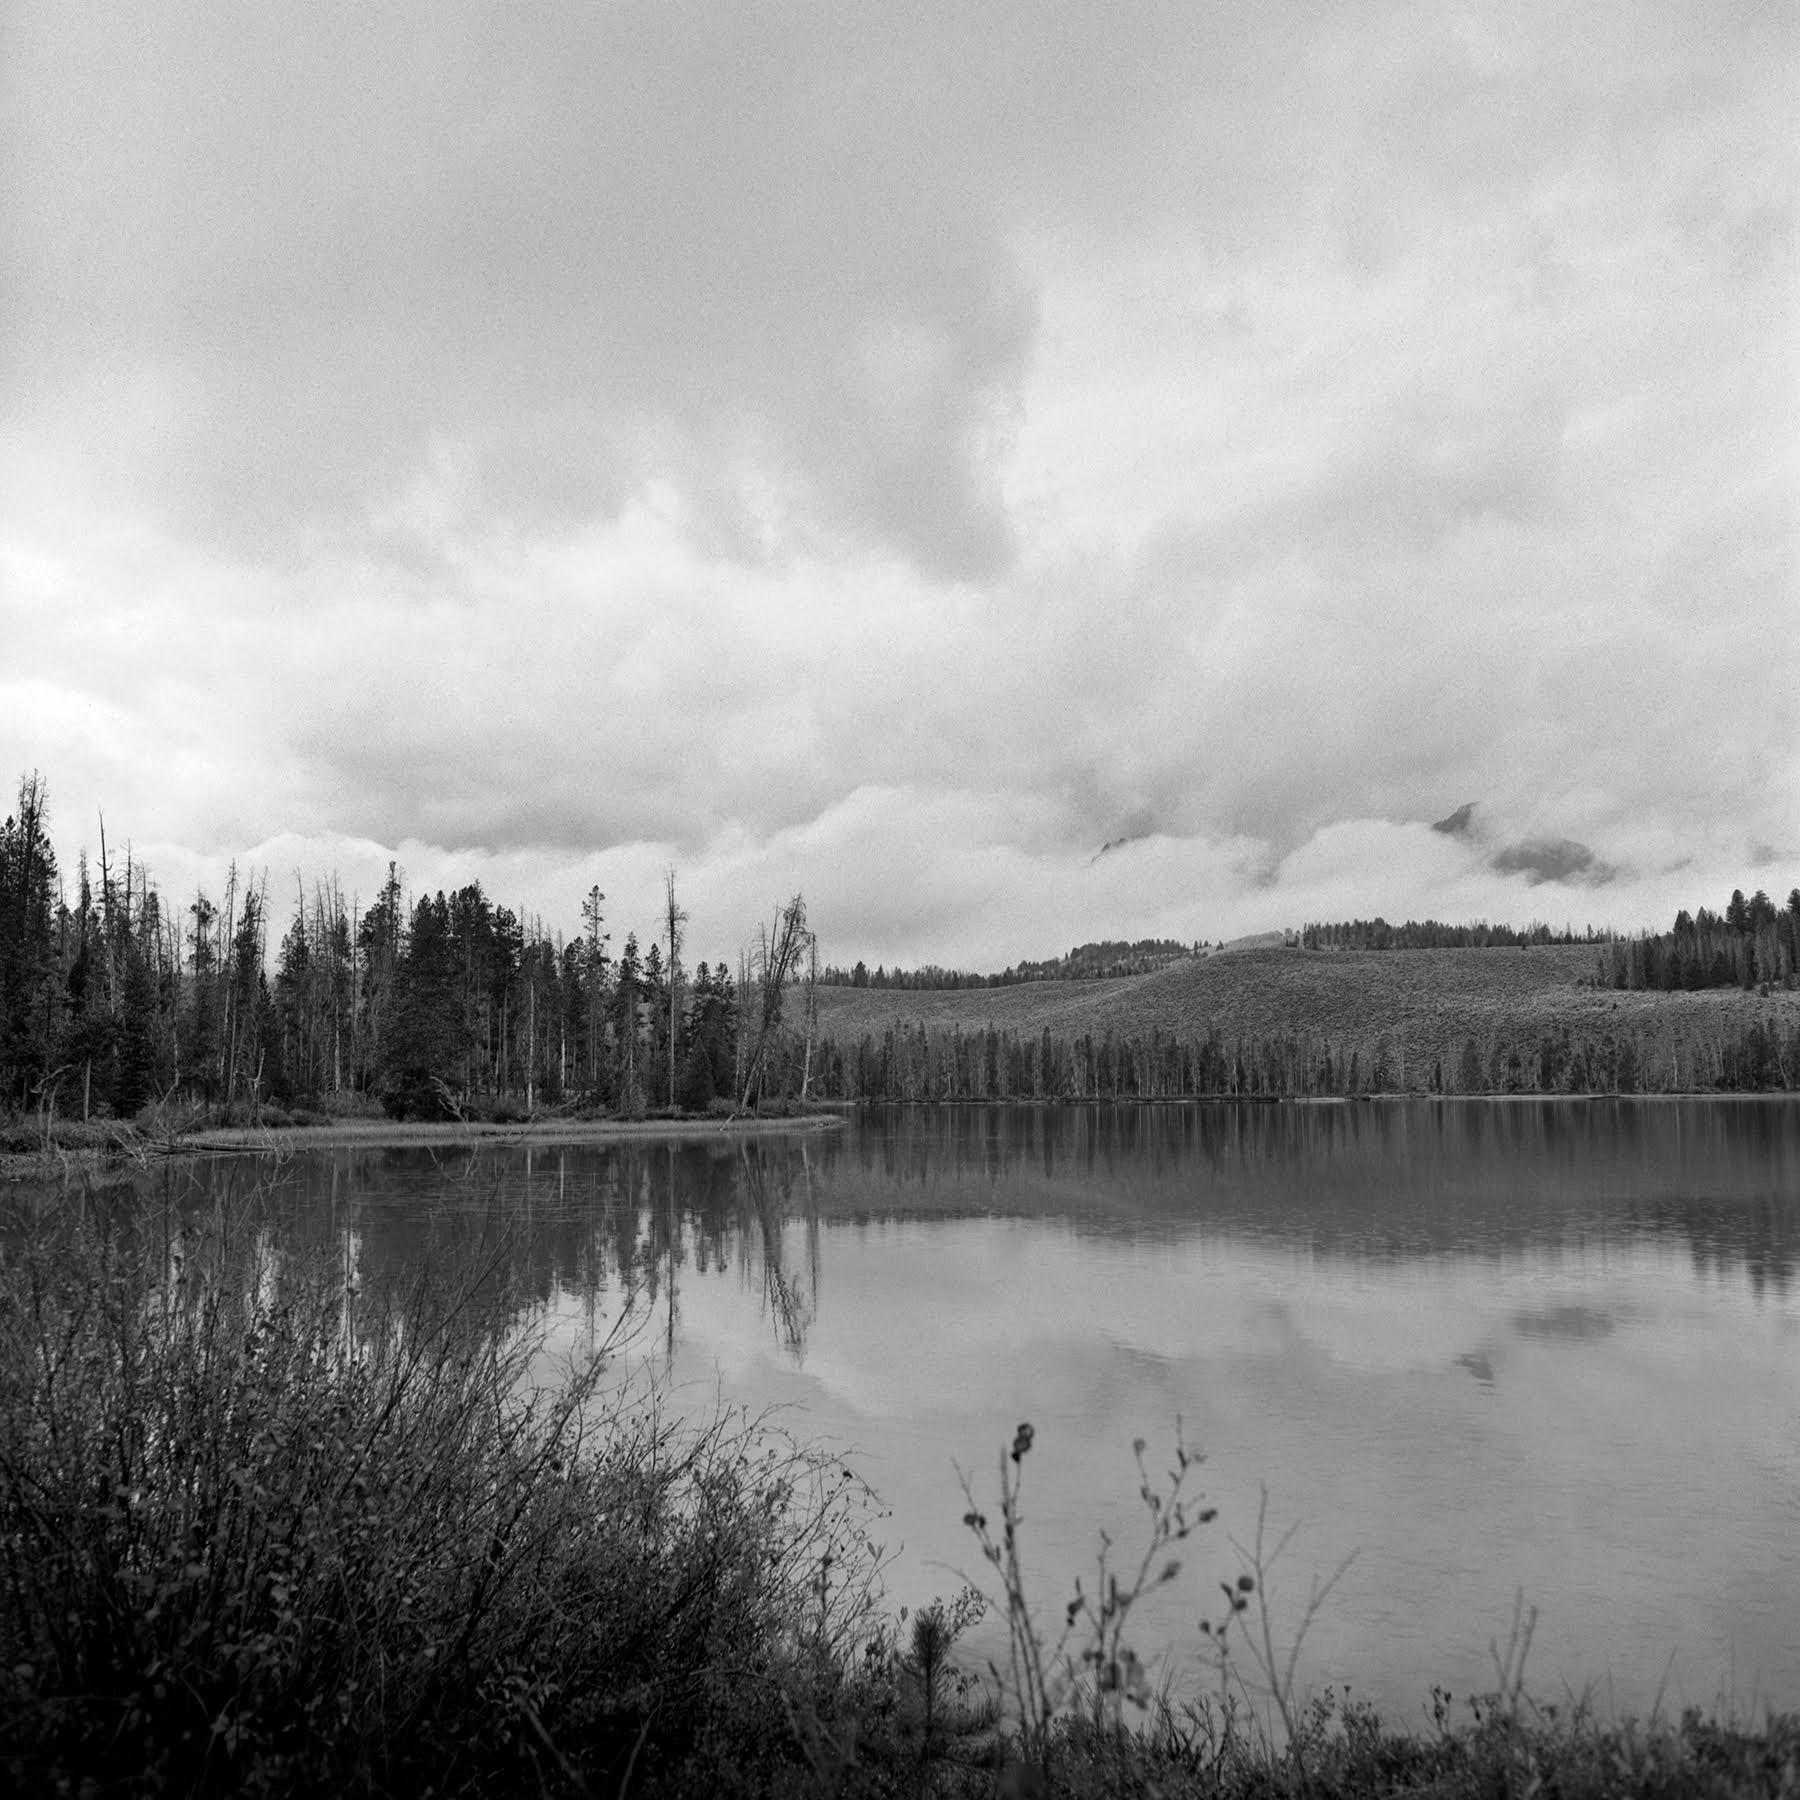 Evening view of the storm in the Sawtooth Mountains from Redfish Lake Rolleiflex FW, Ilford FP-4 plus